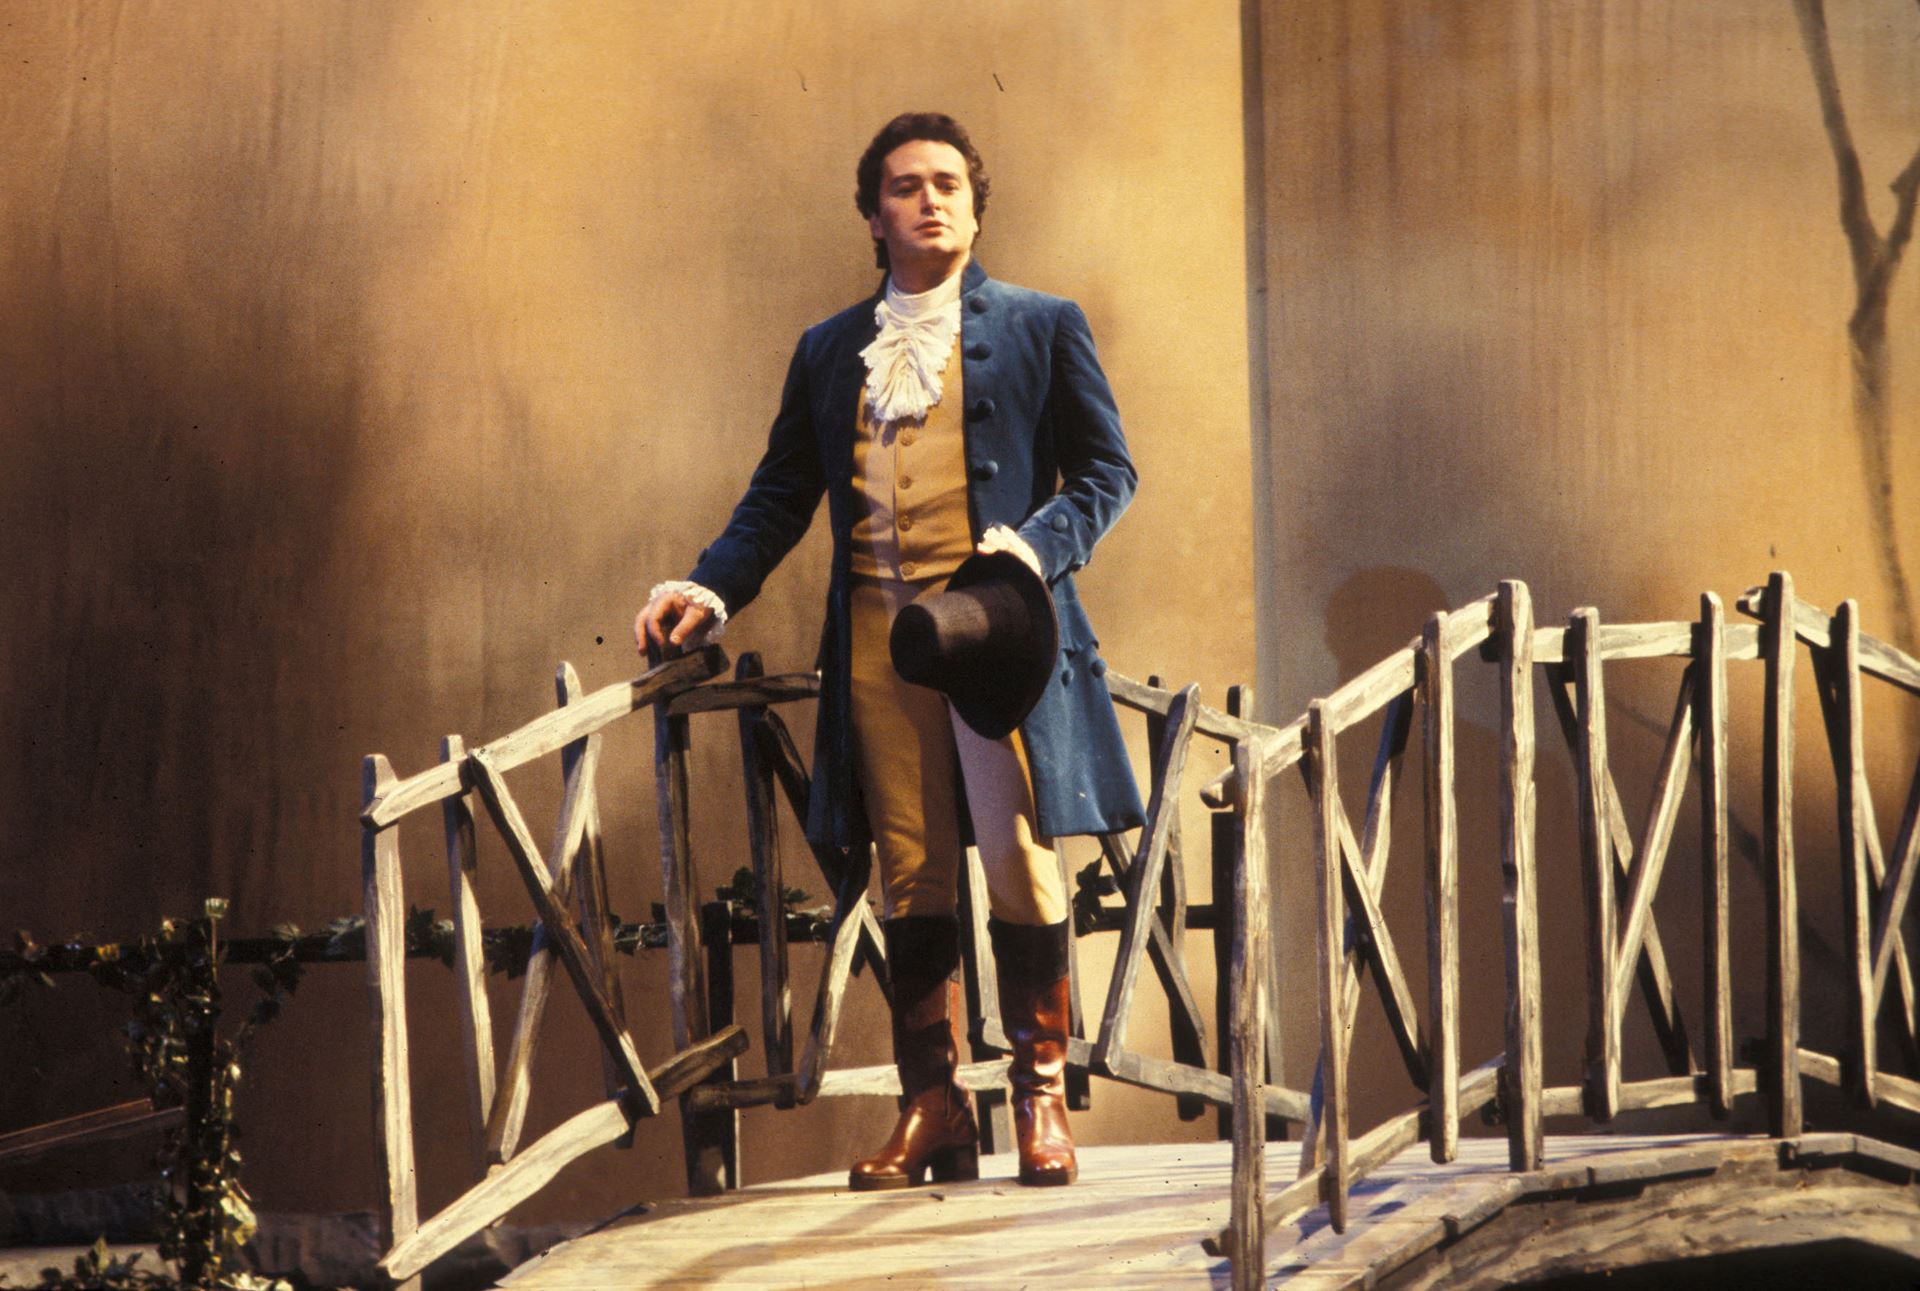 Scene from 1978 WERTHER - A man is standing on a bridge holding a hat